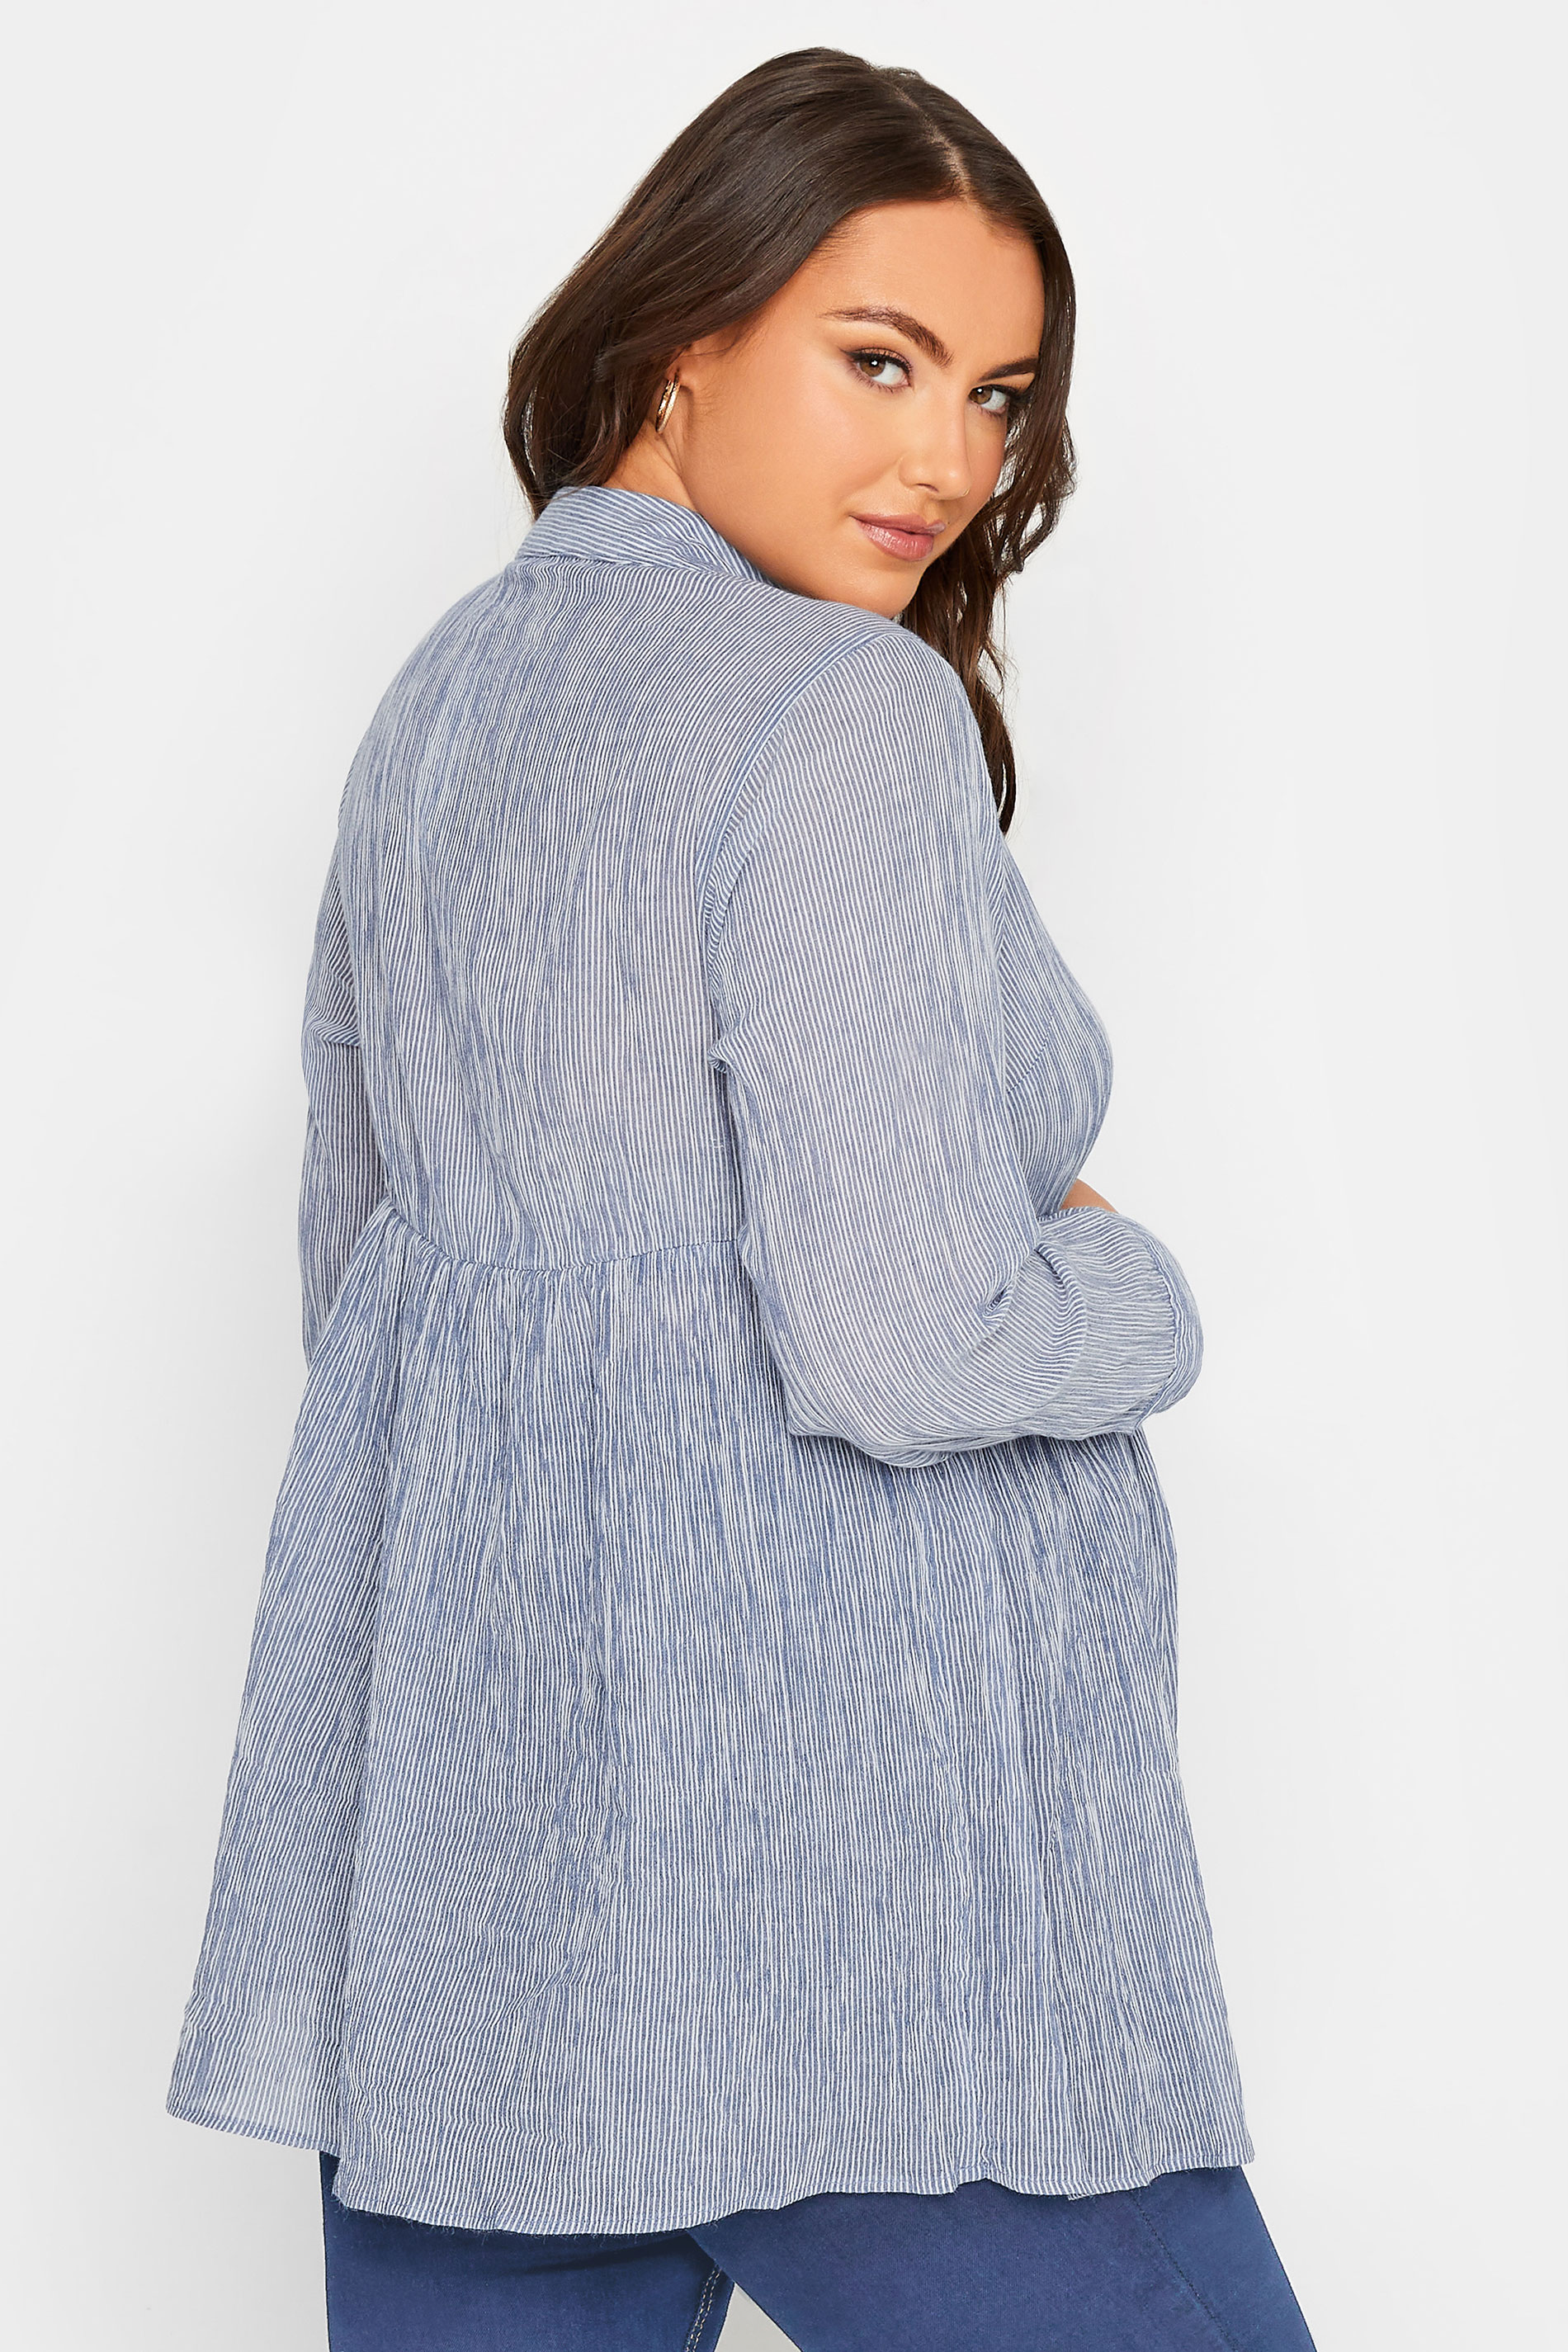 BUMP IT UP MATERNITY Plus Size Blue Stripe Popover Shirt | Yours Clothing 3